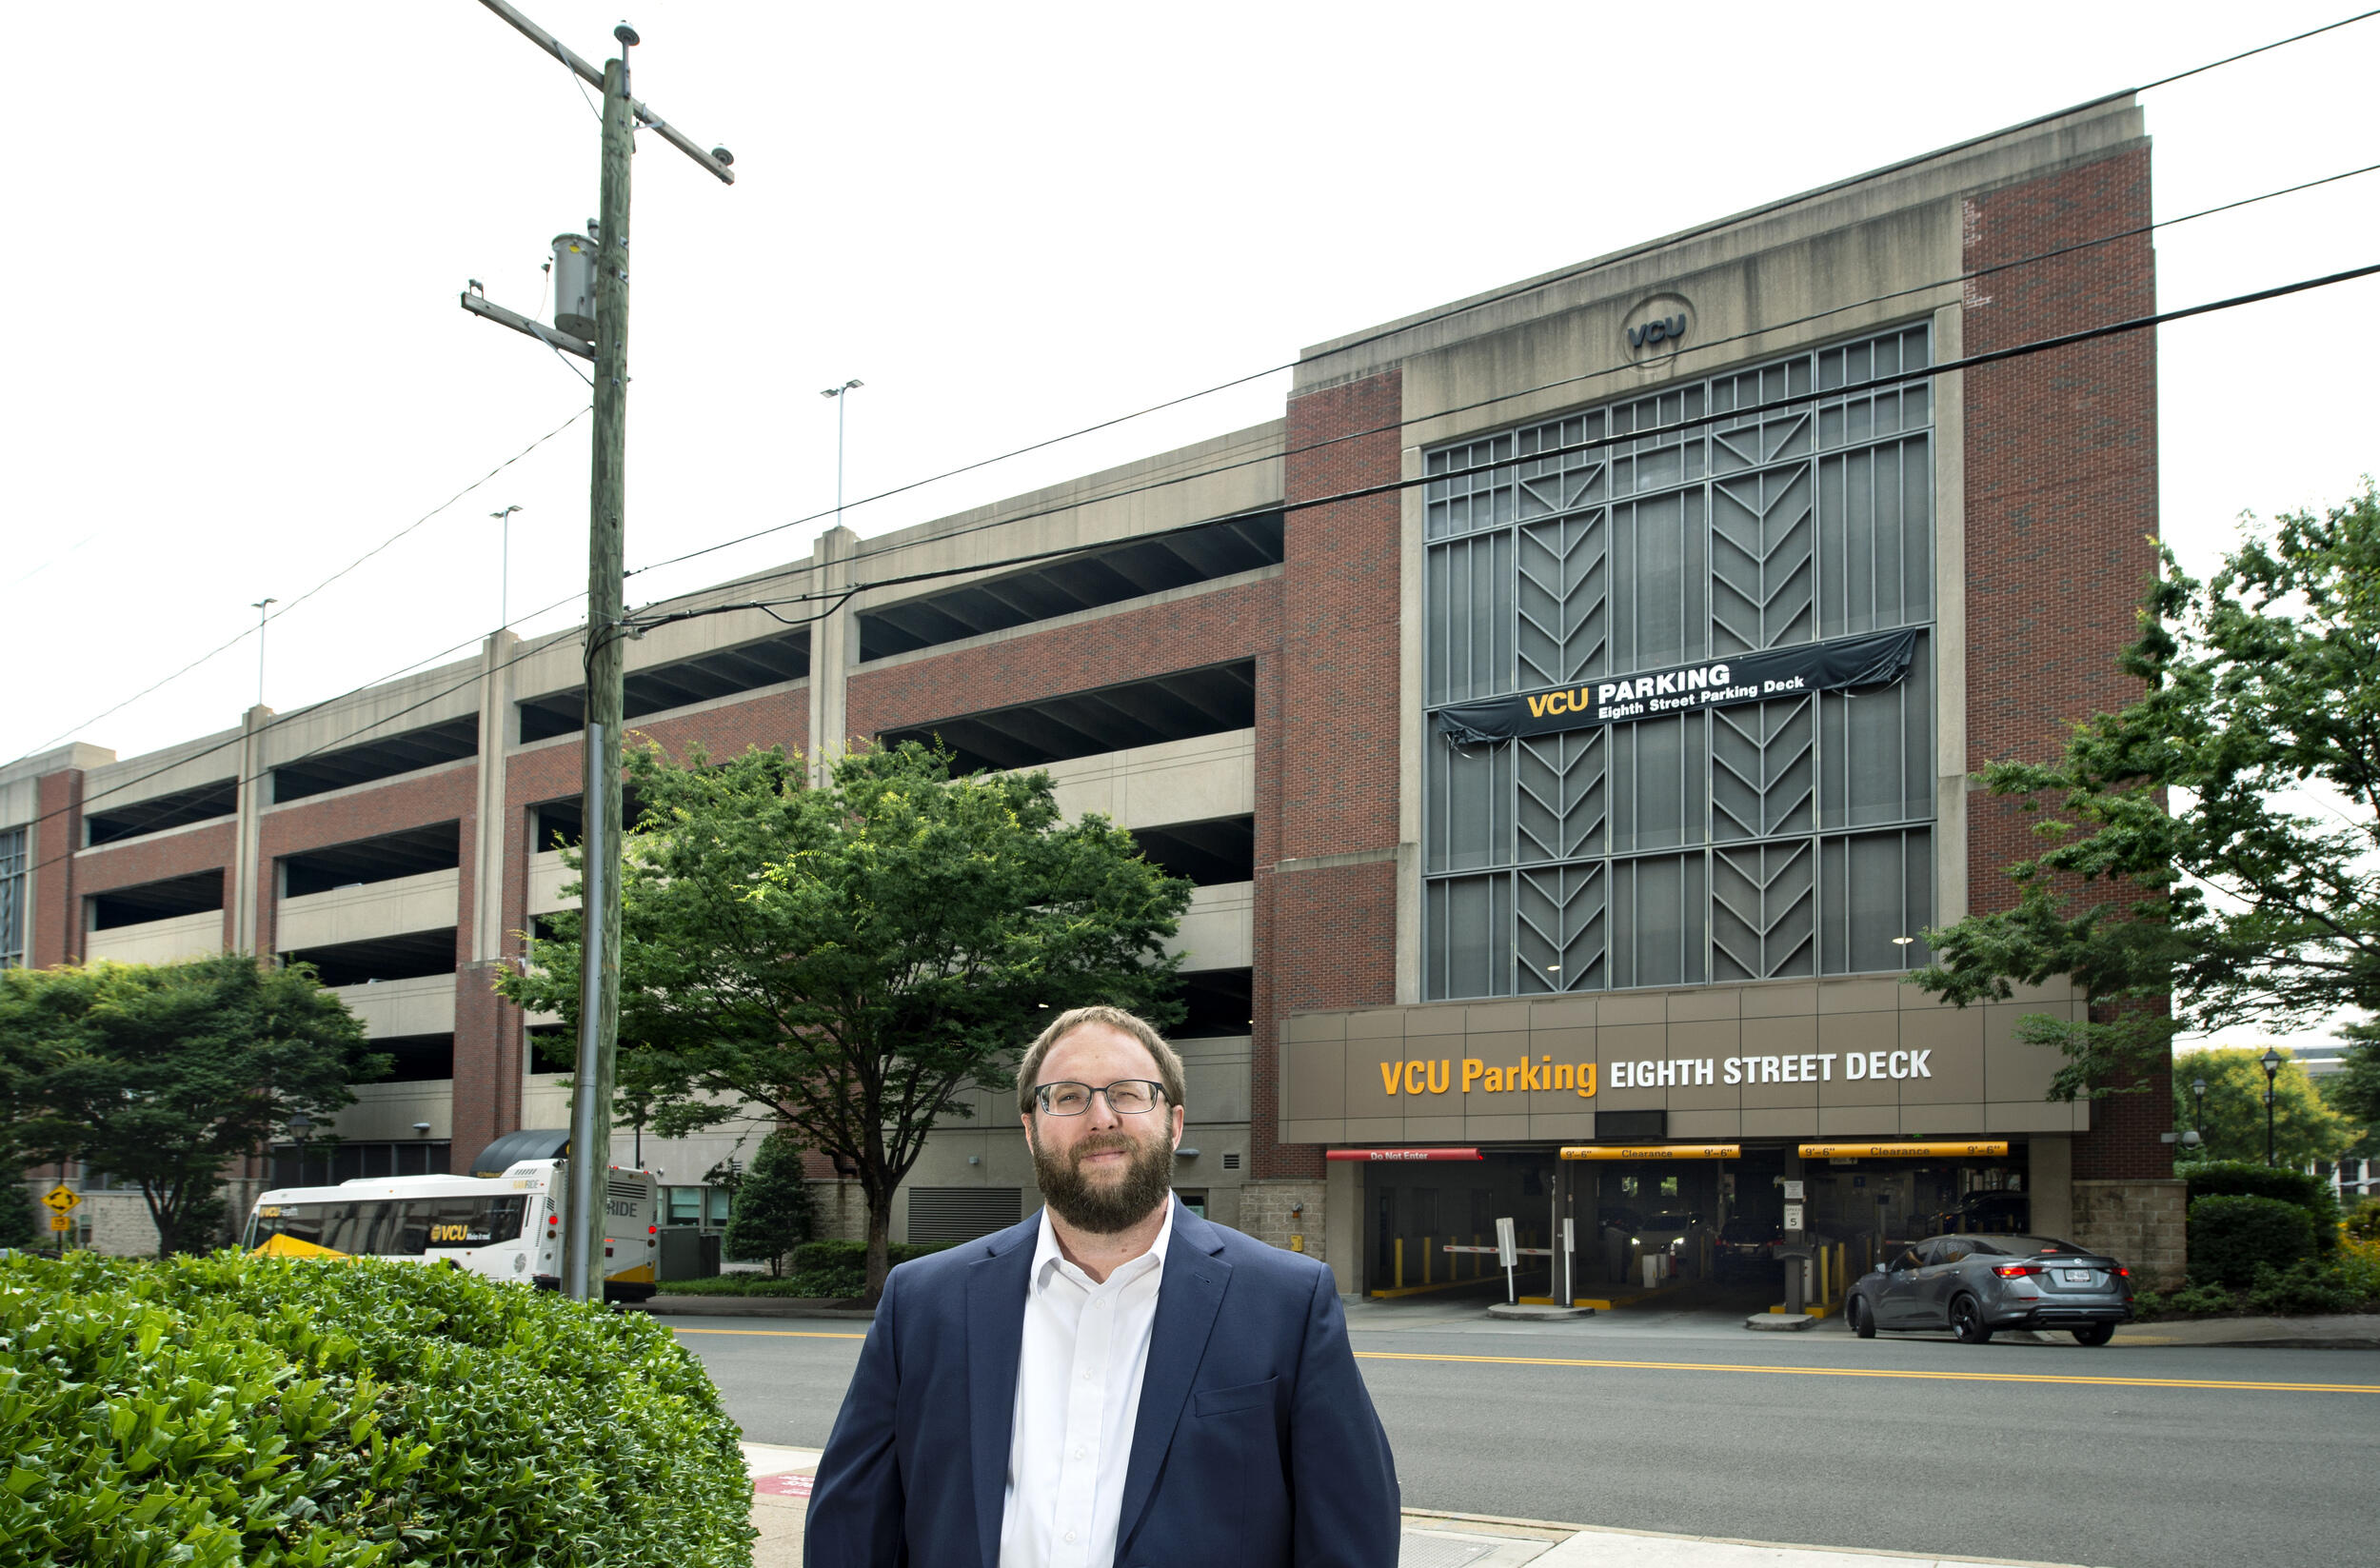 A man standing in front of a parking deck